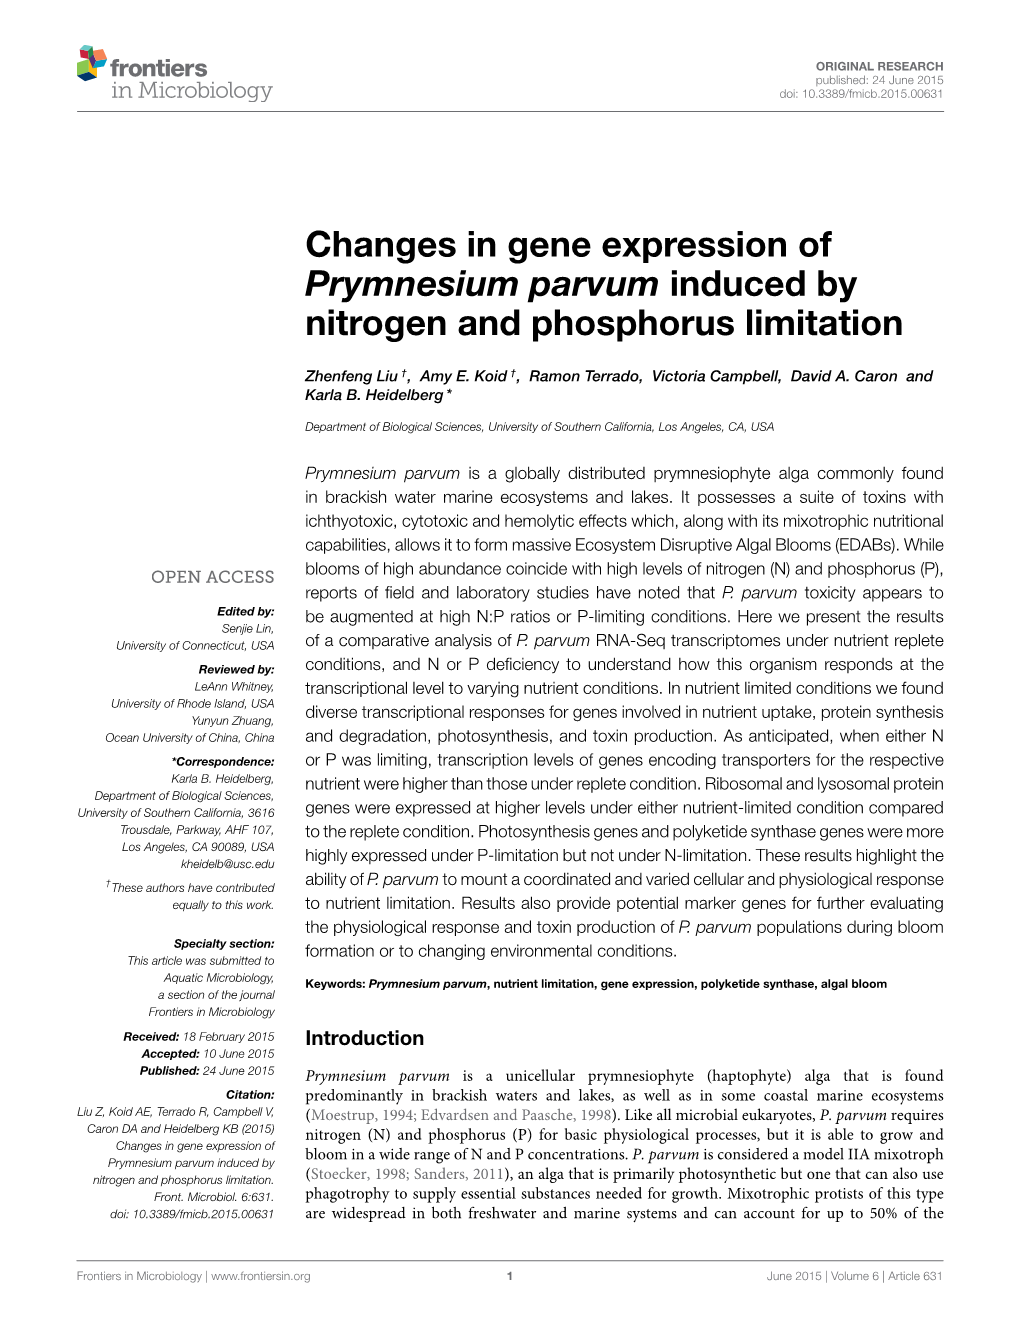 Changes in Gene Expression of Prymnesium Parvum Induced by Nitrogen and Phosphorus Limitation